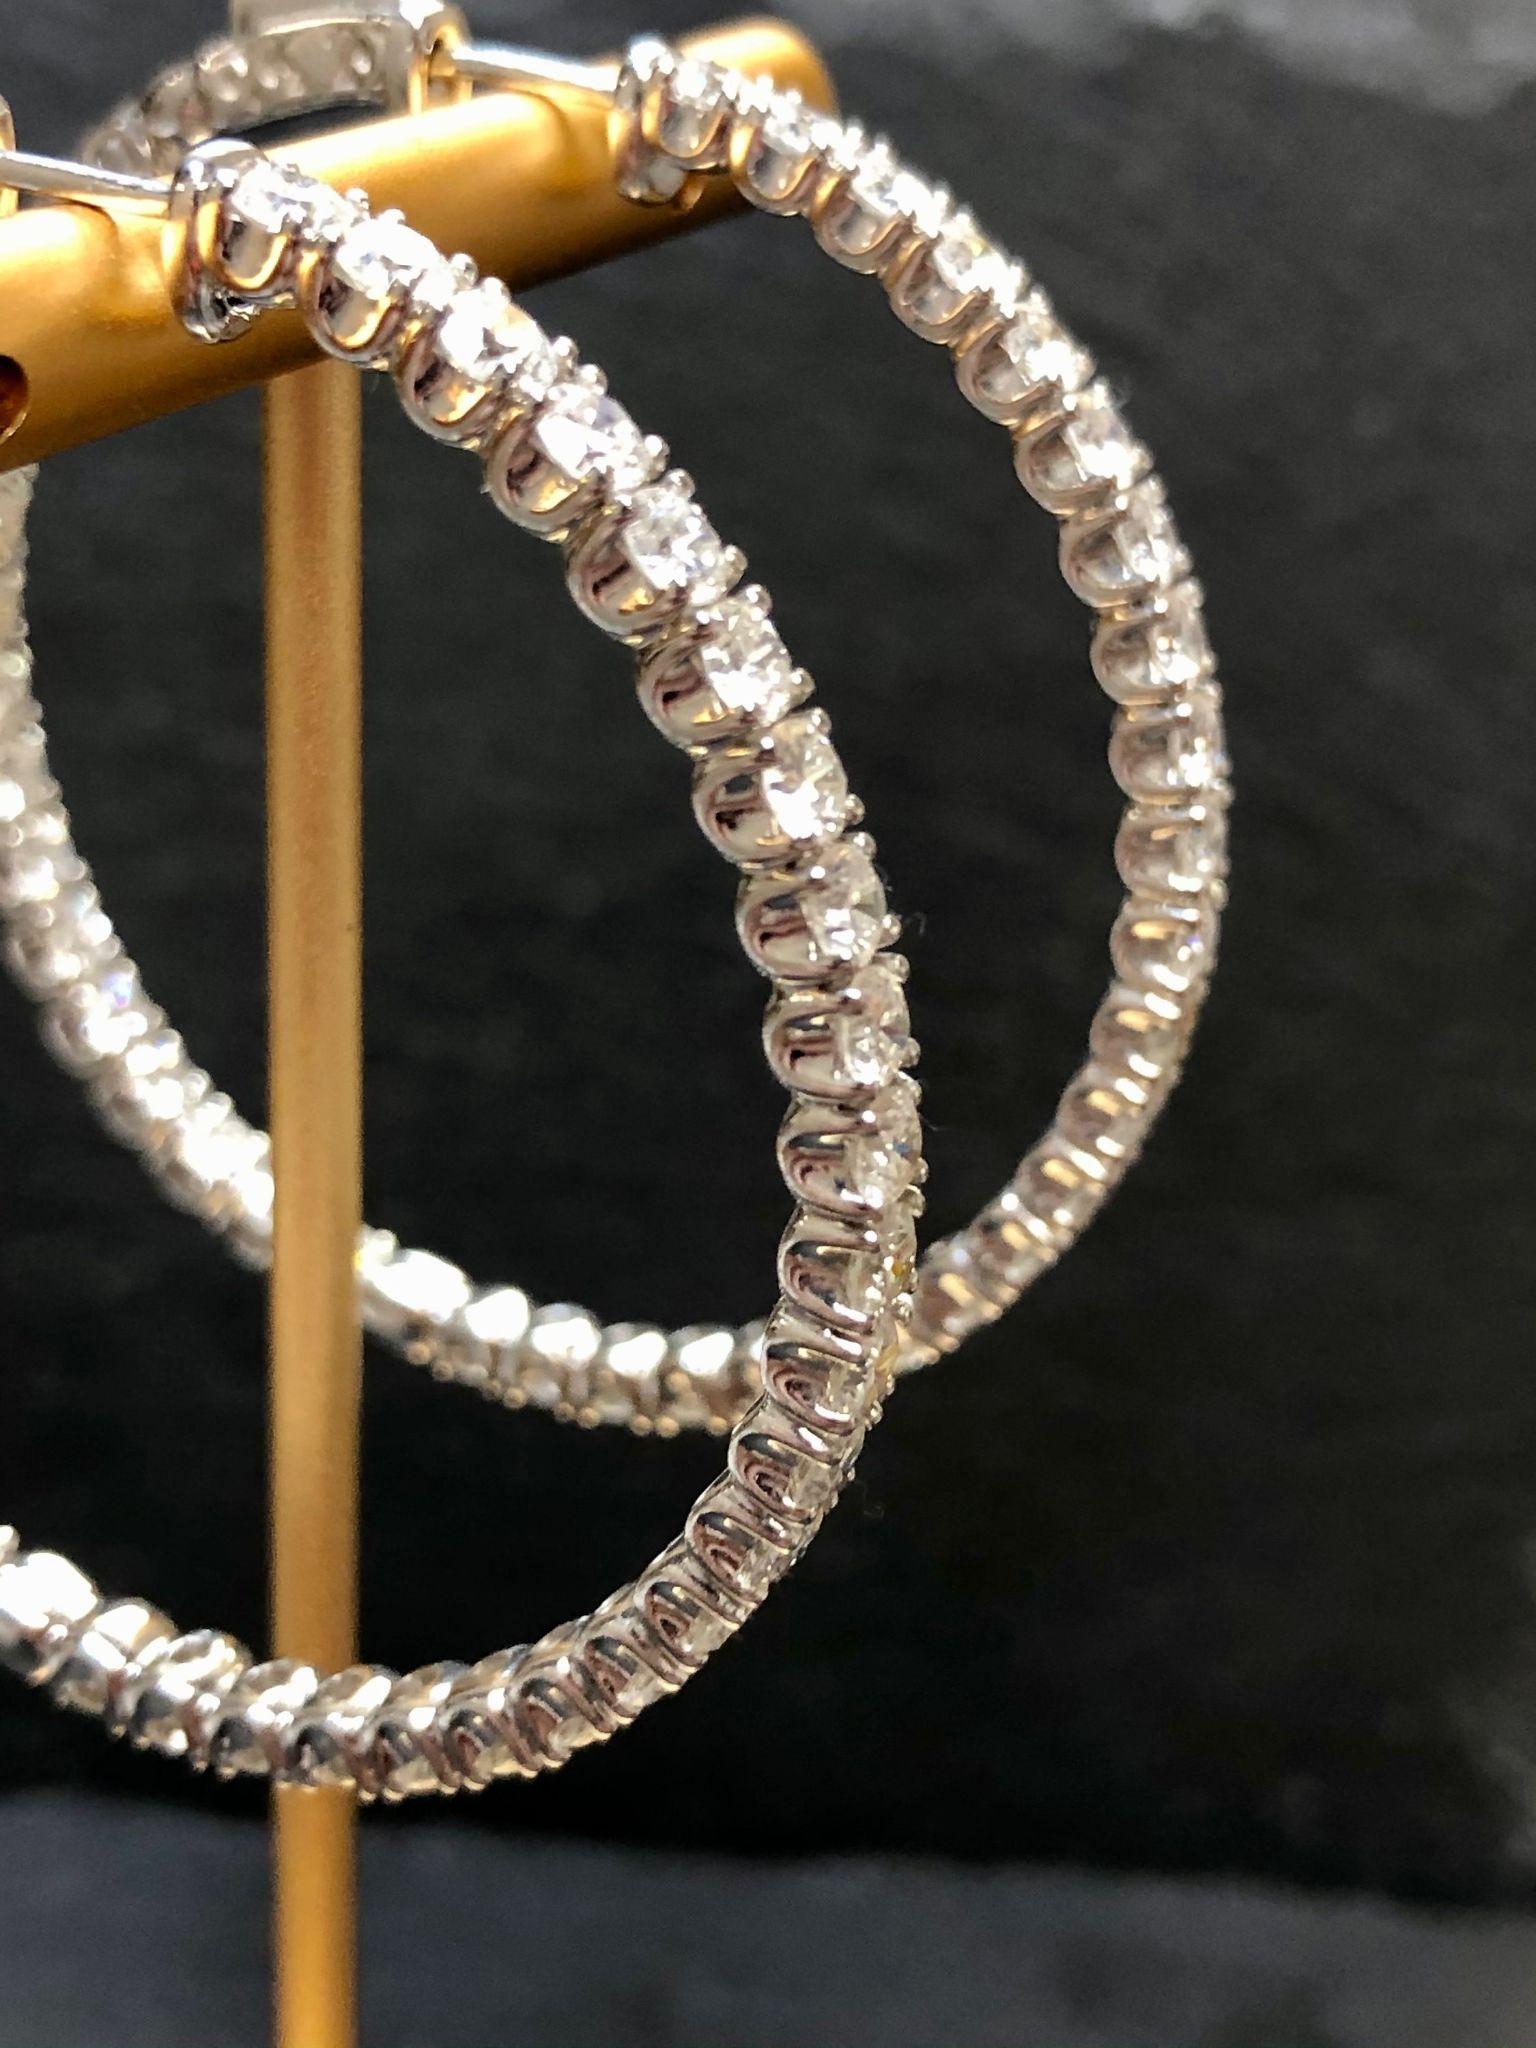 An impressive pair of inside outside hoops done in 14K white gold and set with approximately 10.50cttw (78 stones) in G-I color Si1-2 clarity diamonds.

Dimensions/Weight
3.30mm wide by 2” in diameter. Weighs 13.1dwt.

Condition
All stones are